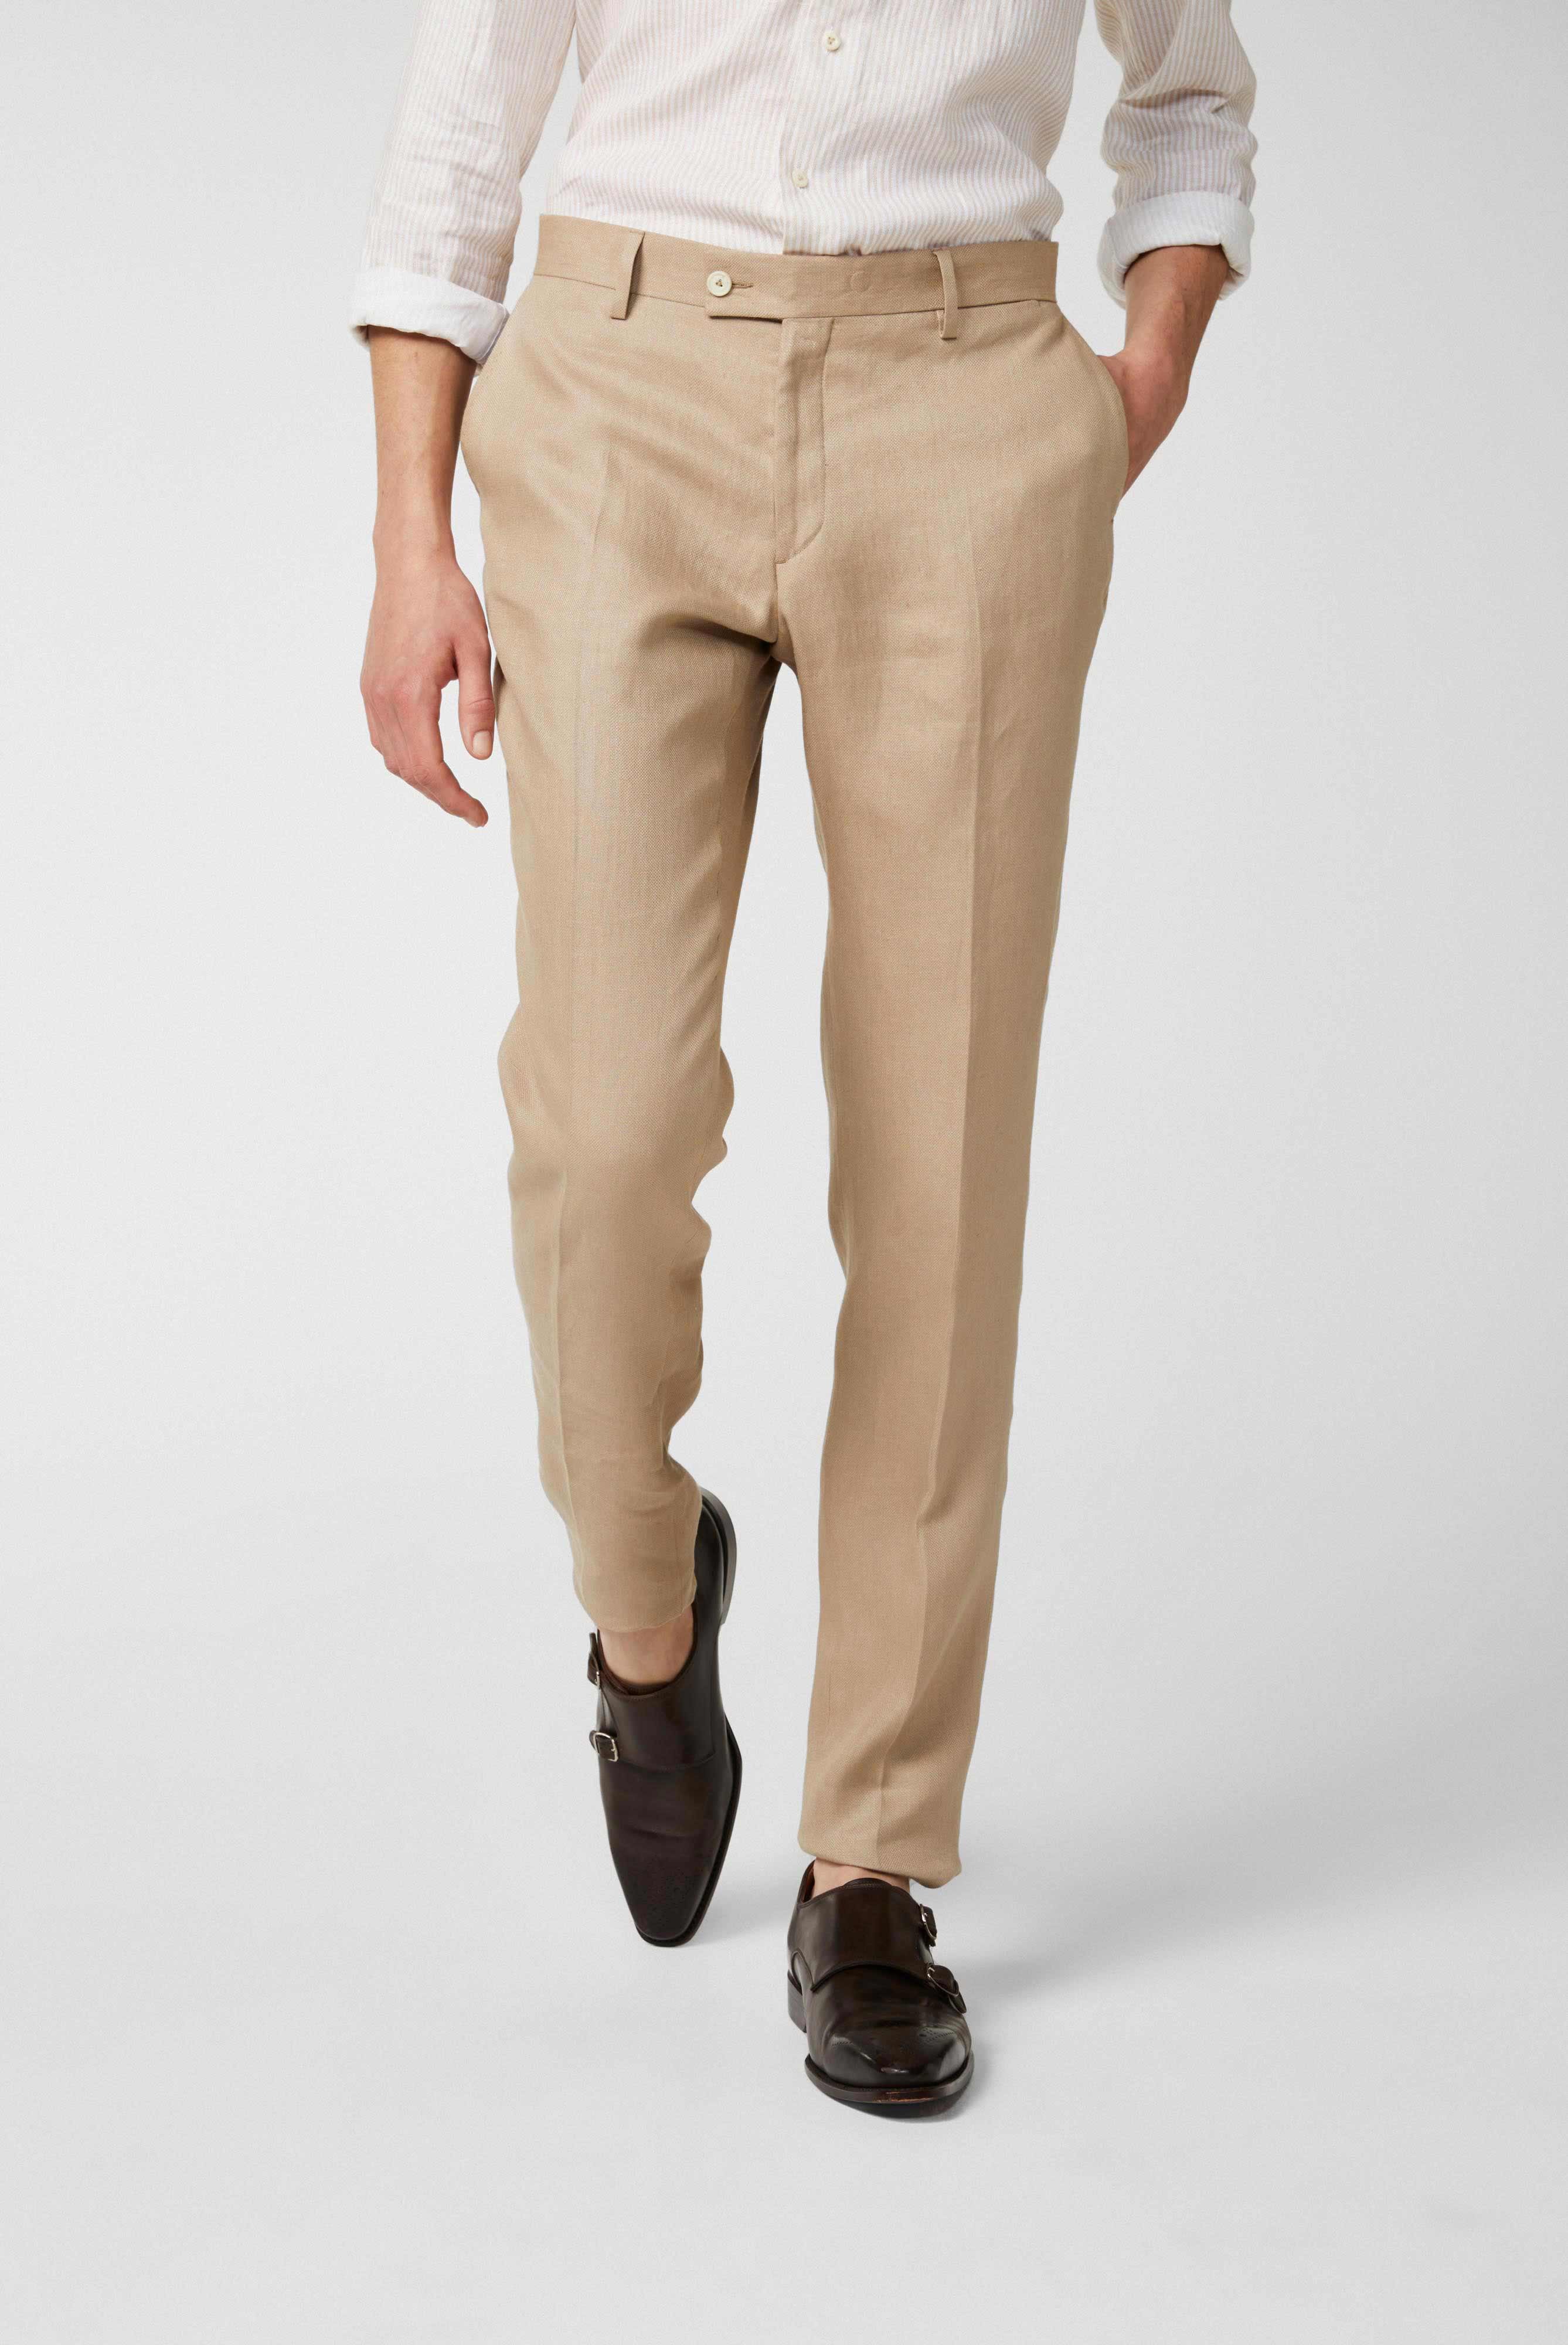 Jeans & Trousers+Slim-fit trousers in textured linen fabric beige+80.7854.16.H55045.130.50